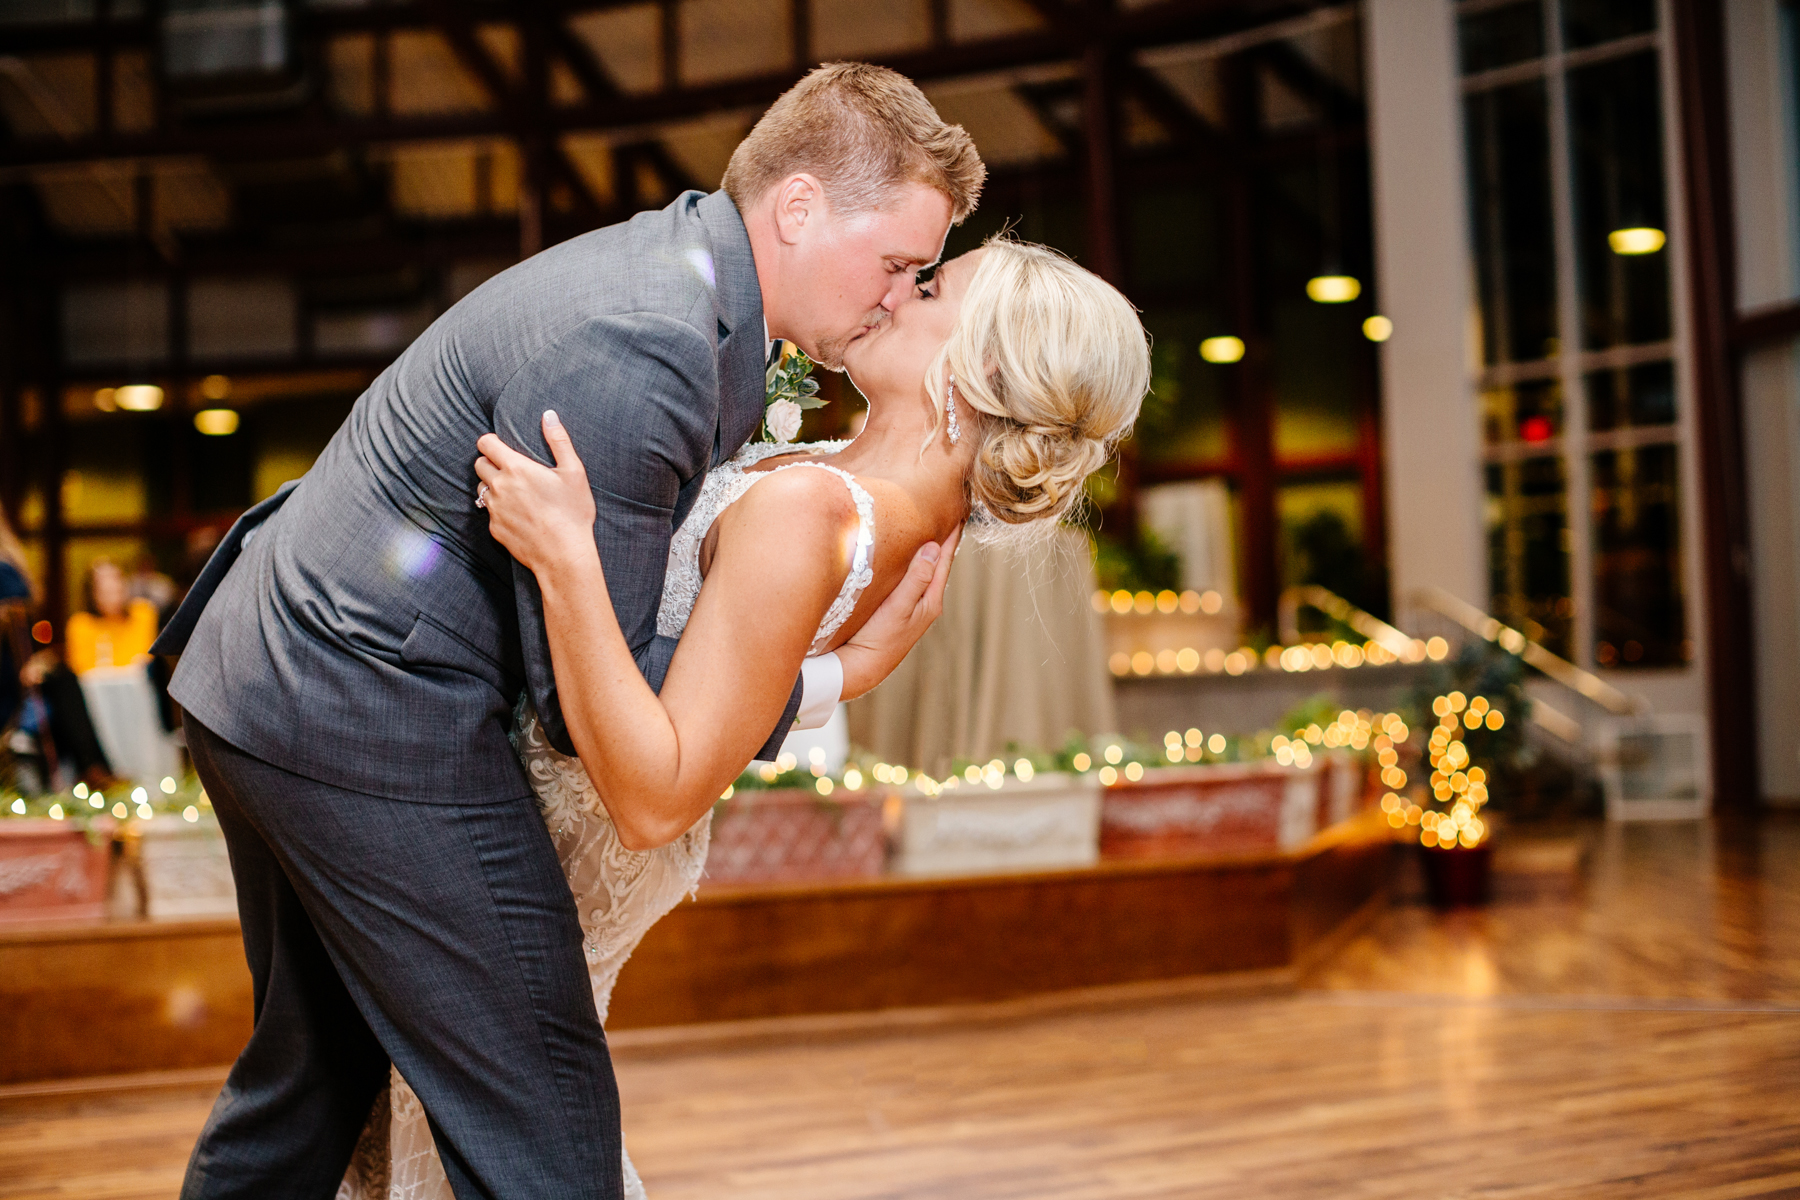 Laketown Golf and Conference Center wedding reception 